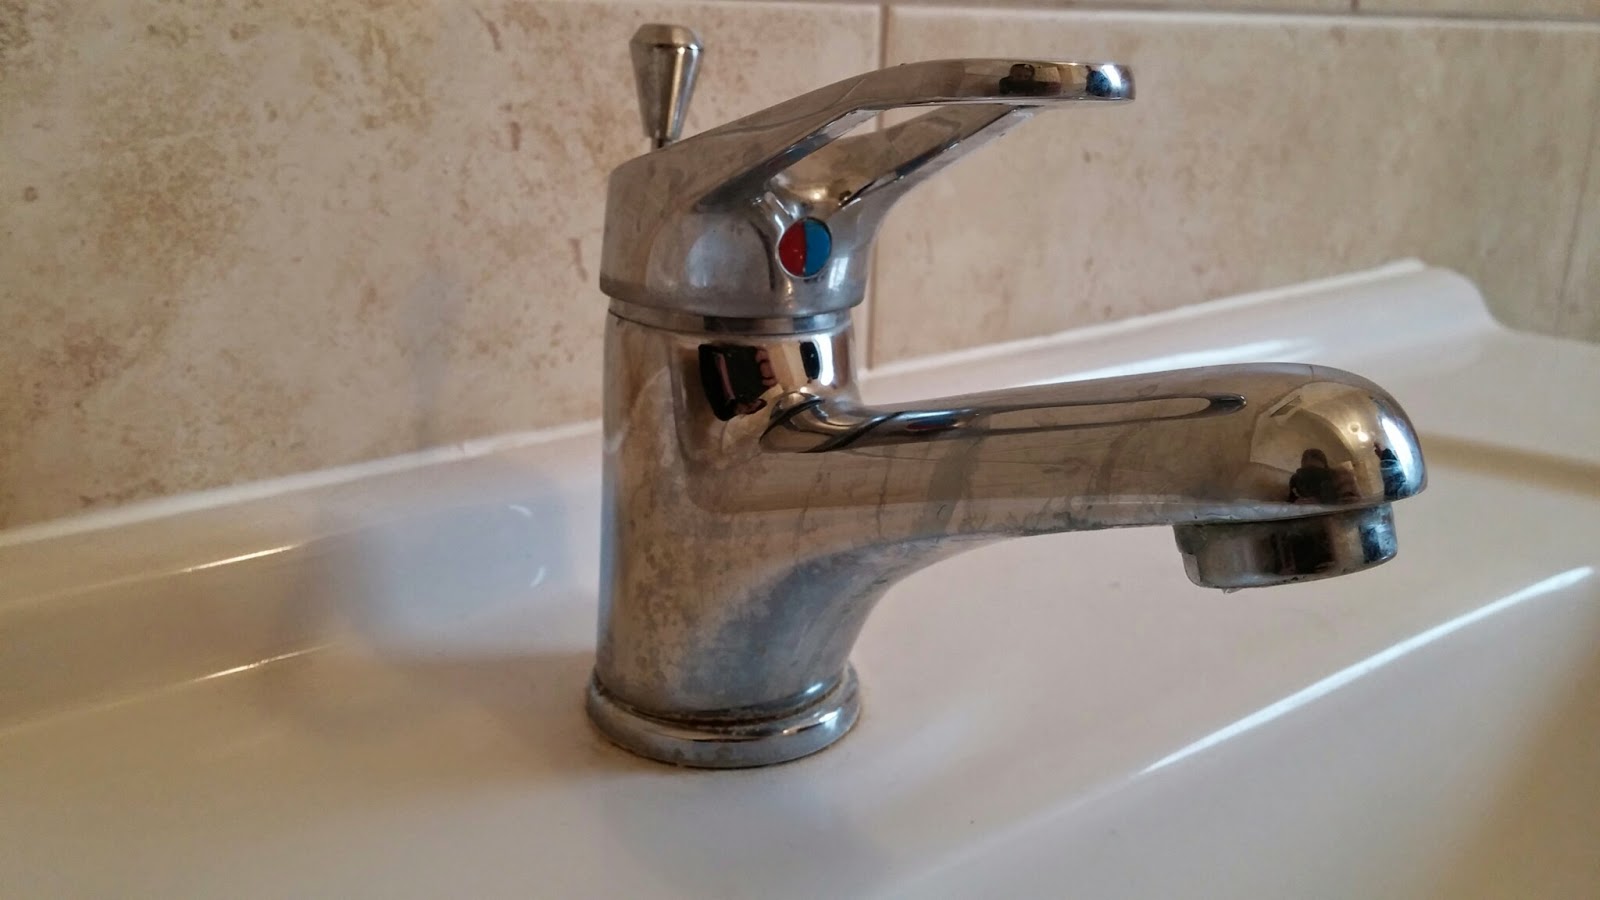 The old bathroom tap